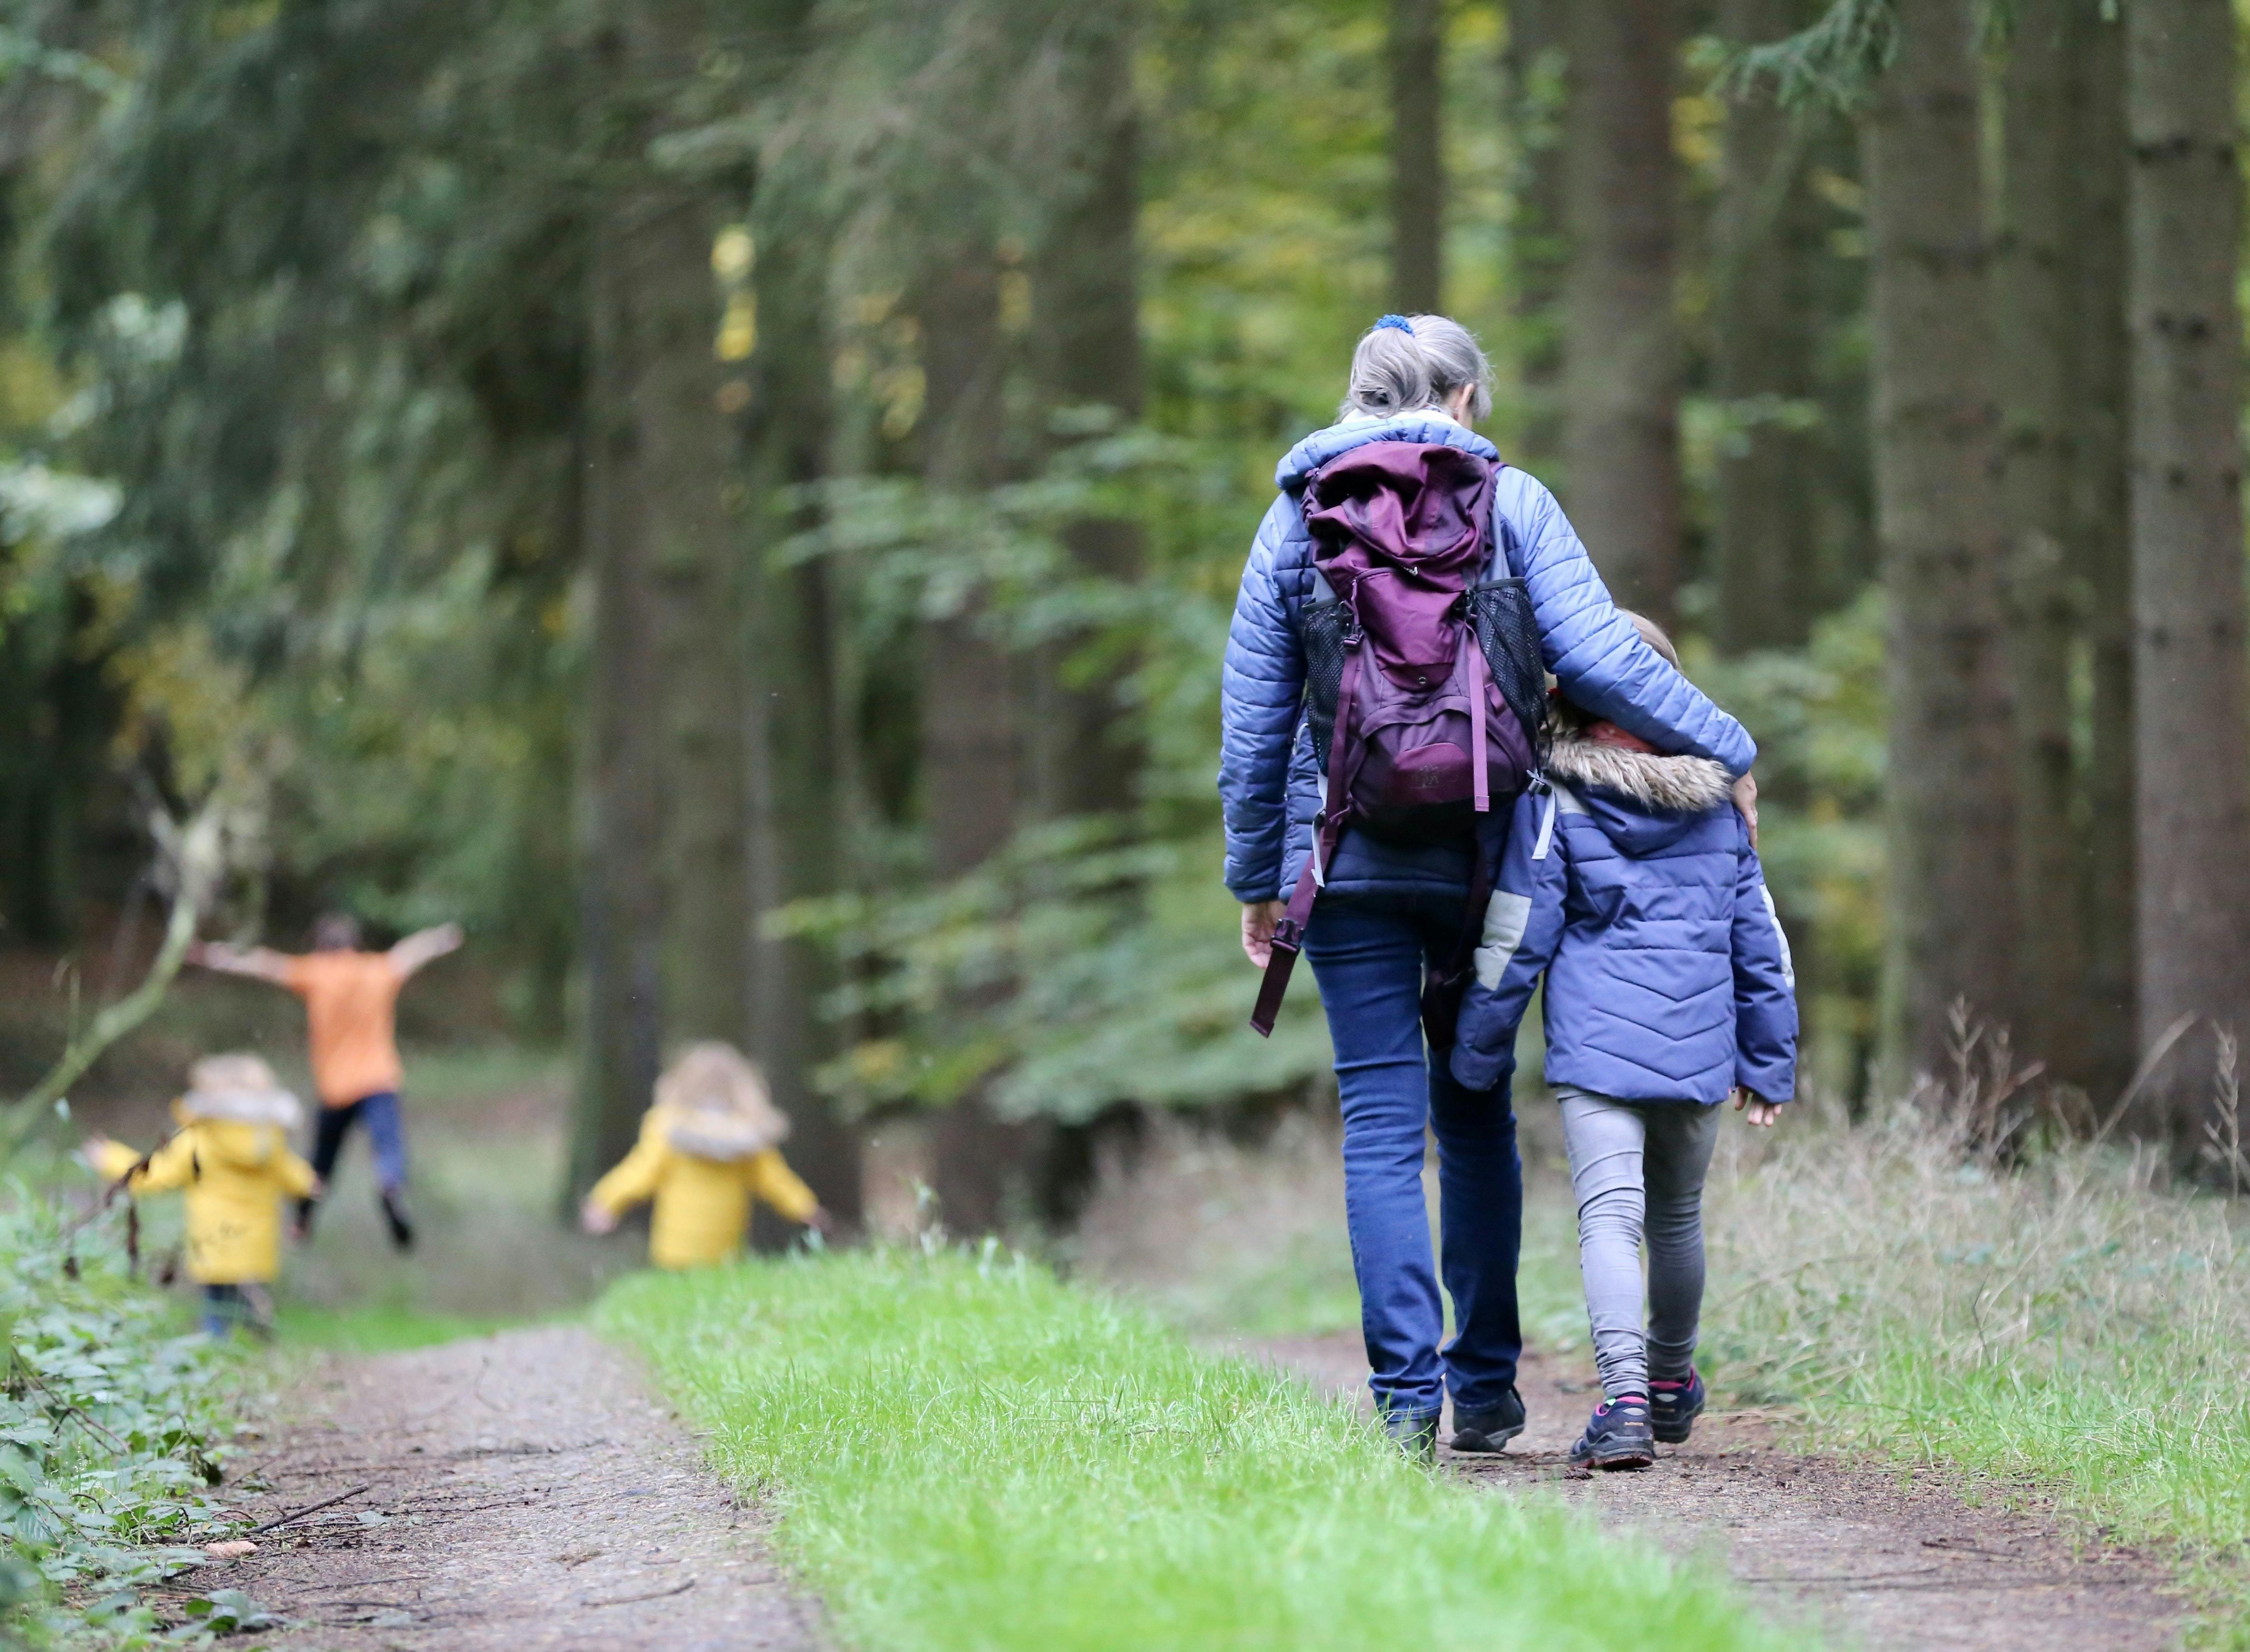 An adult and child hiking in a forest.